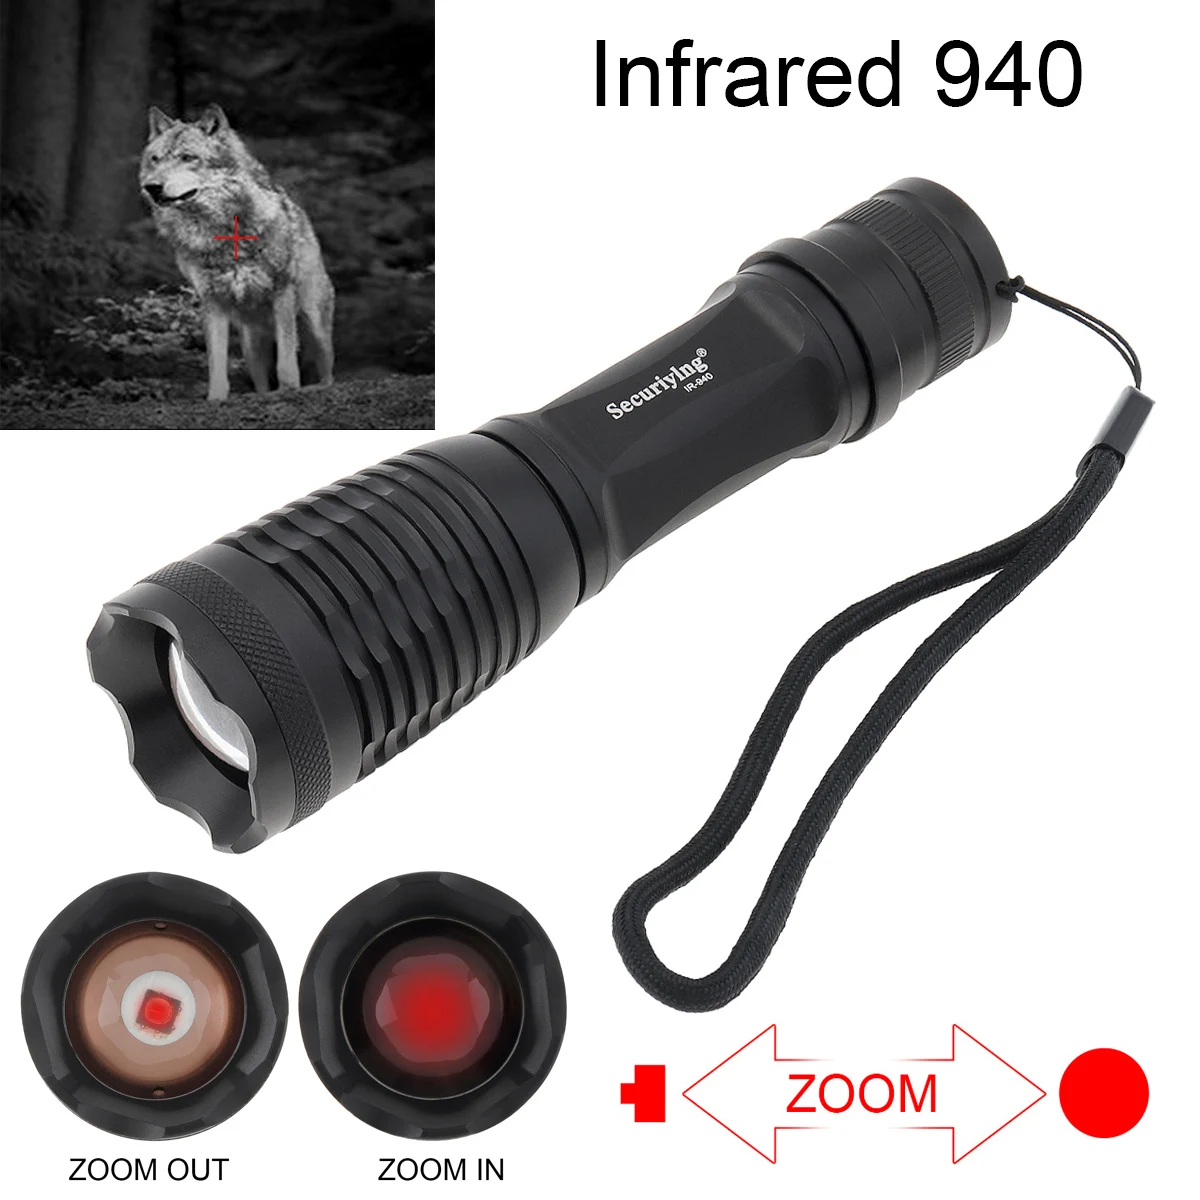 

Long Working time IR Hunting Flashlight Zoomable Focus 940nm LED Infrared Radiation IR Night Vision Torch for Hunting Predator